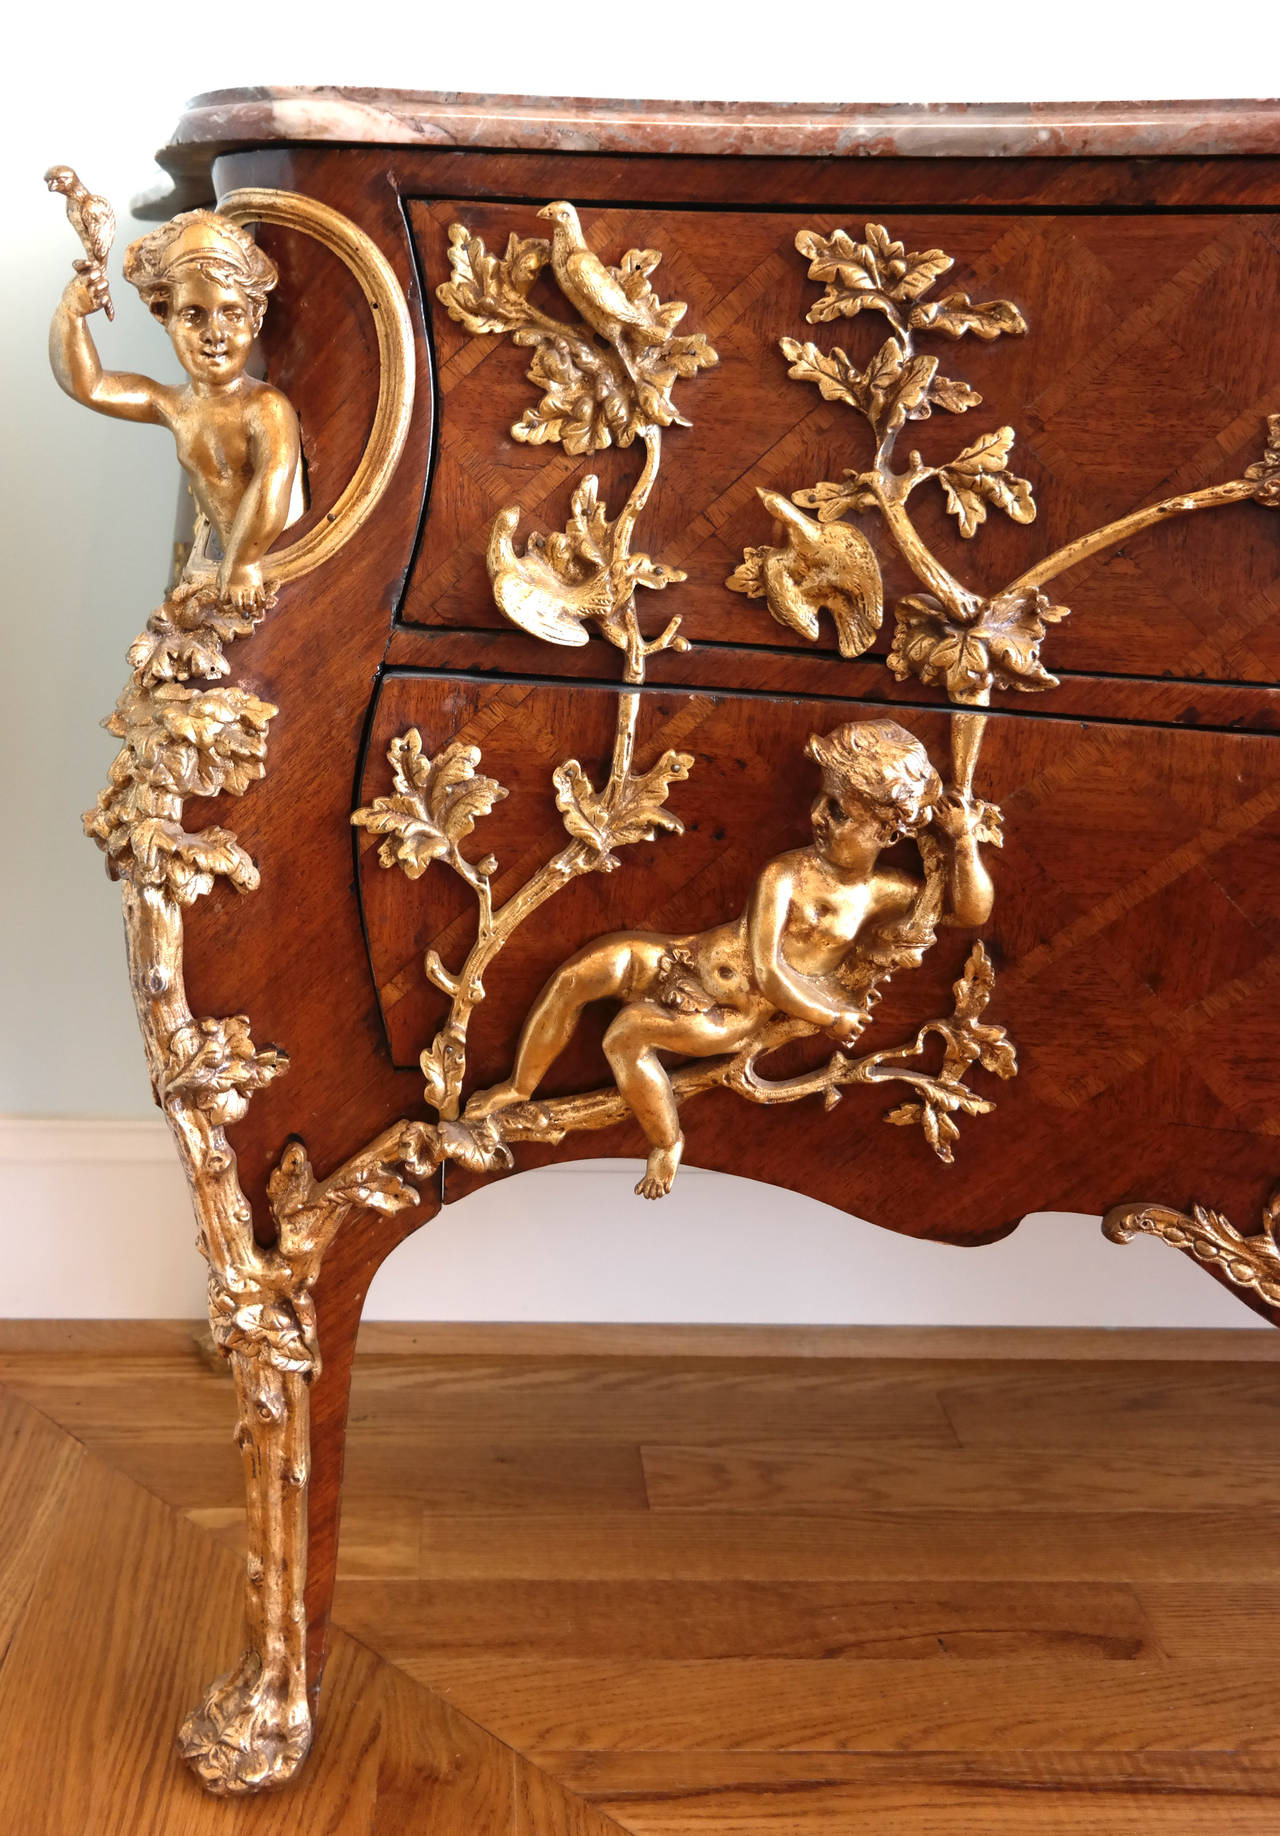 A Regence style gilt bronze mounted kingwood and trellised parquetry commode in the manner of Charles Cresscent, France, ca. 1900